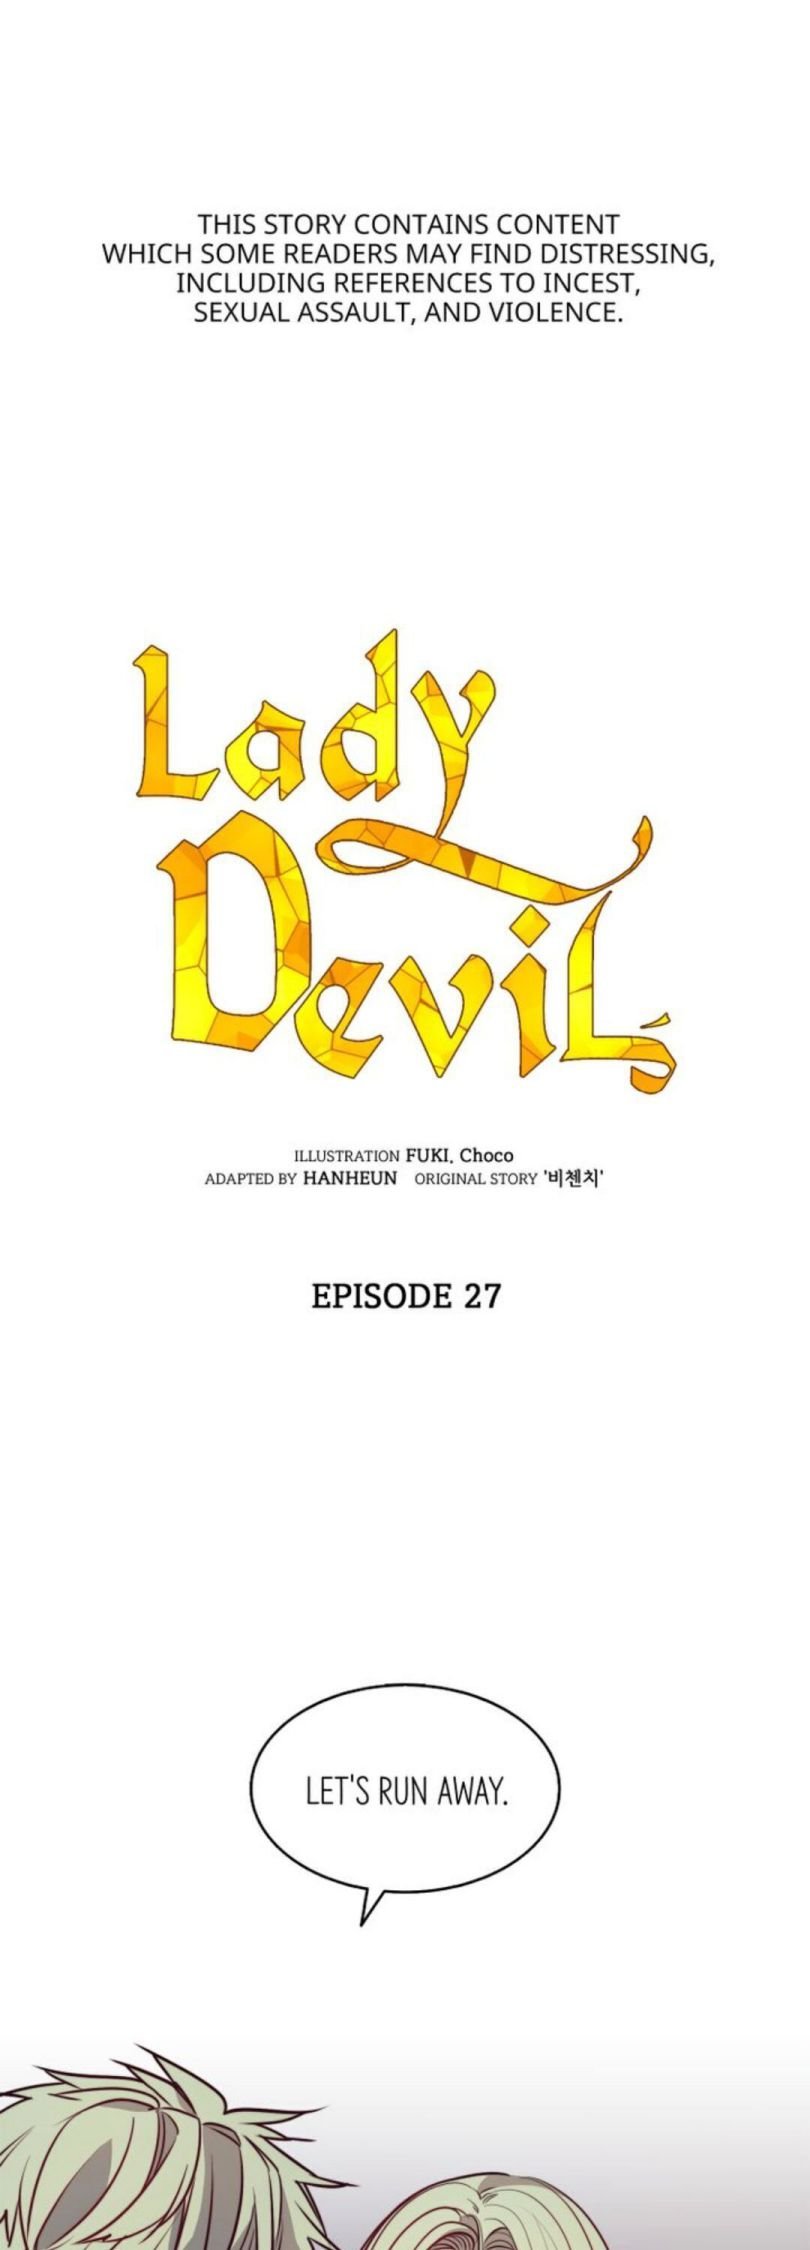 The Devil chapter 27